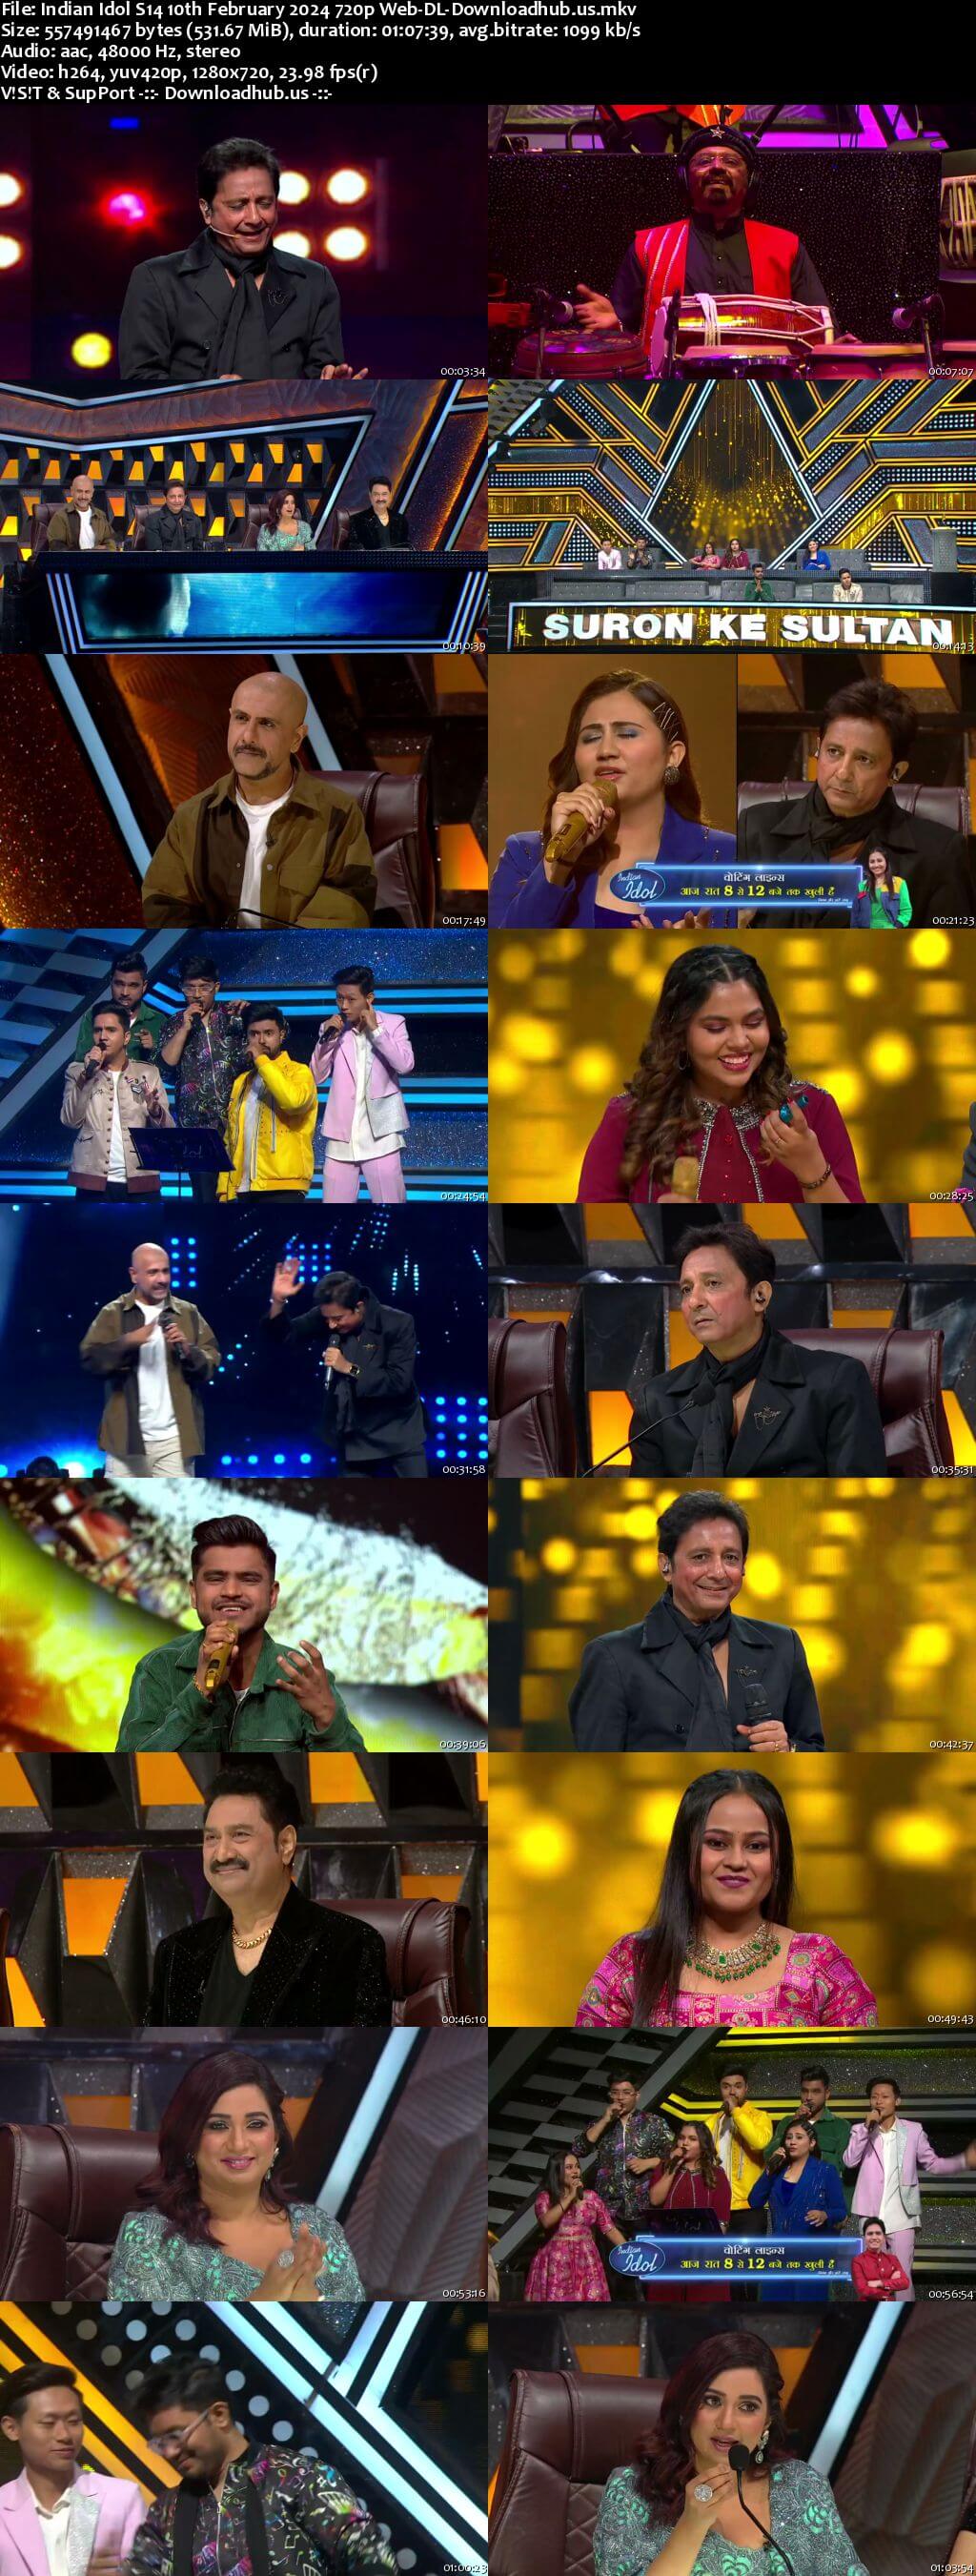 Indian Idol S14 10 February 2024 Episode 37 Web-DL 720p 480p